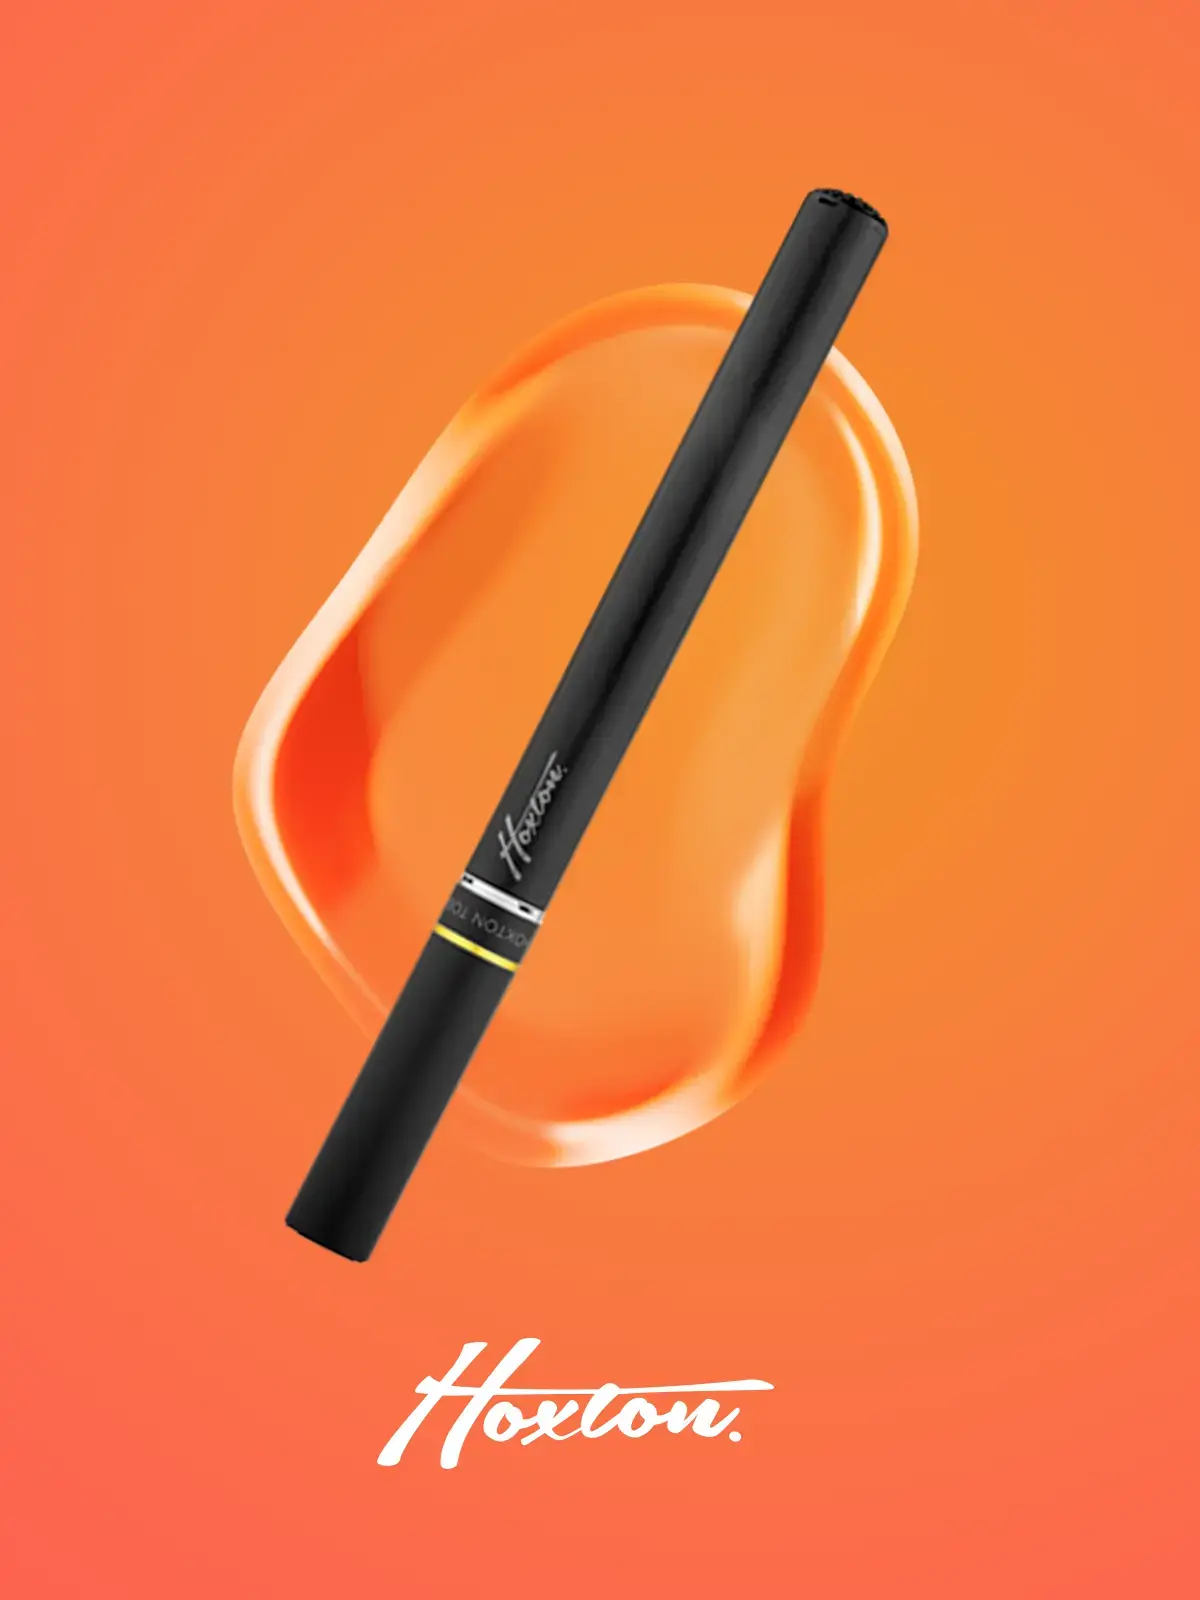 A Hoxton Black Edition cigalike device in front of a decorative orange background along with the Hoxton logo